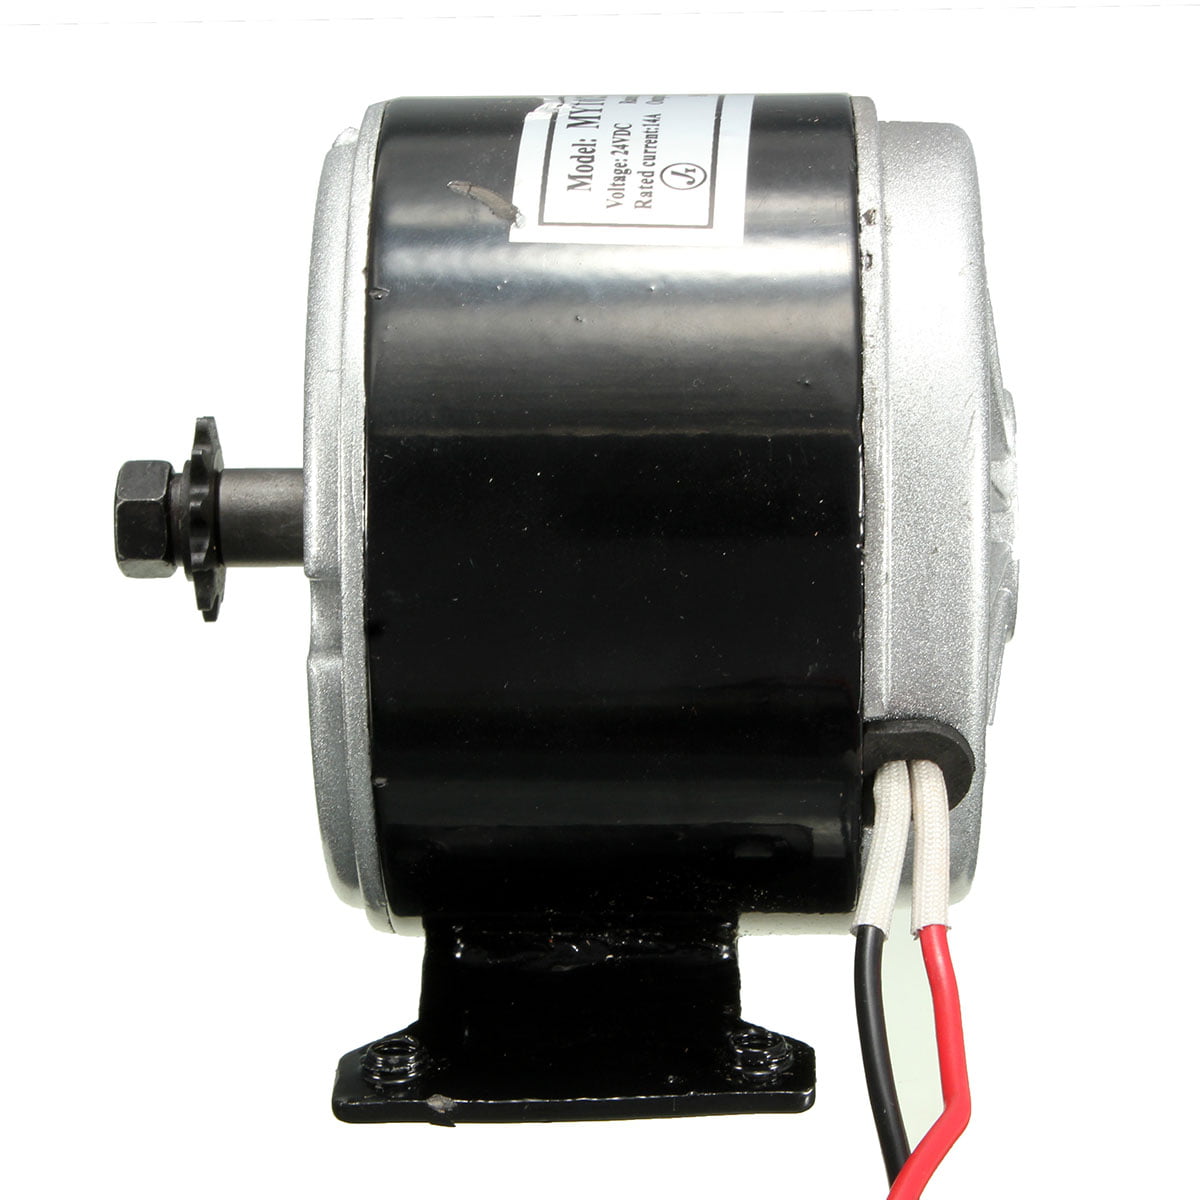 250W 24V Electric Motor Brushed 2750 RPM For DIY E-Bike Scooter Bicycle MY1025 